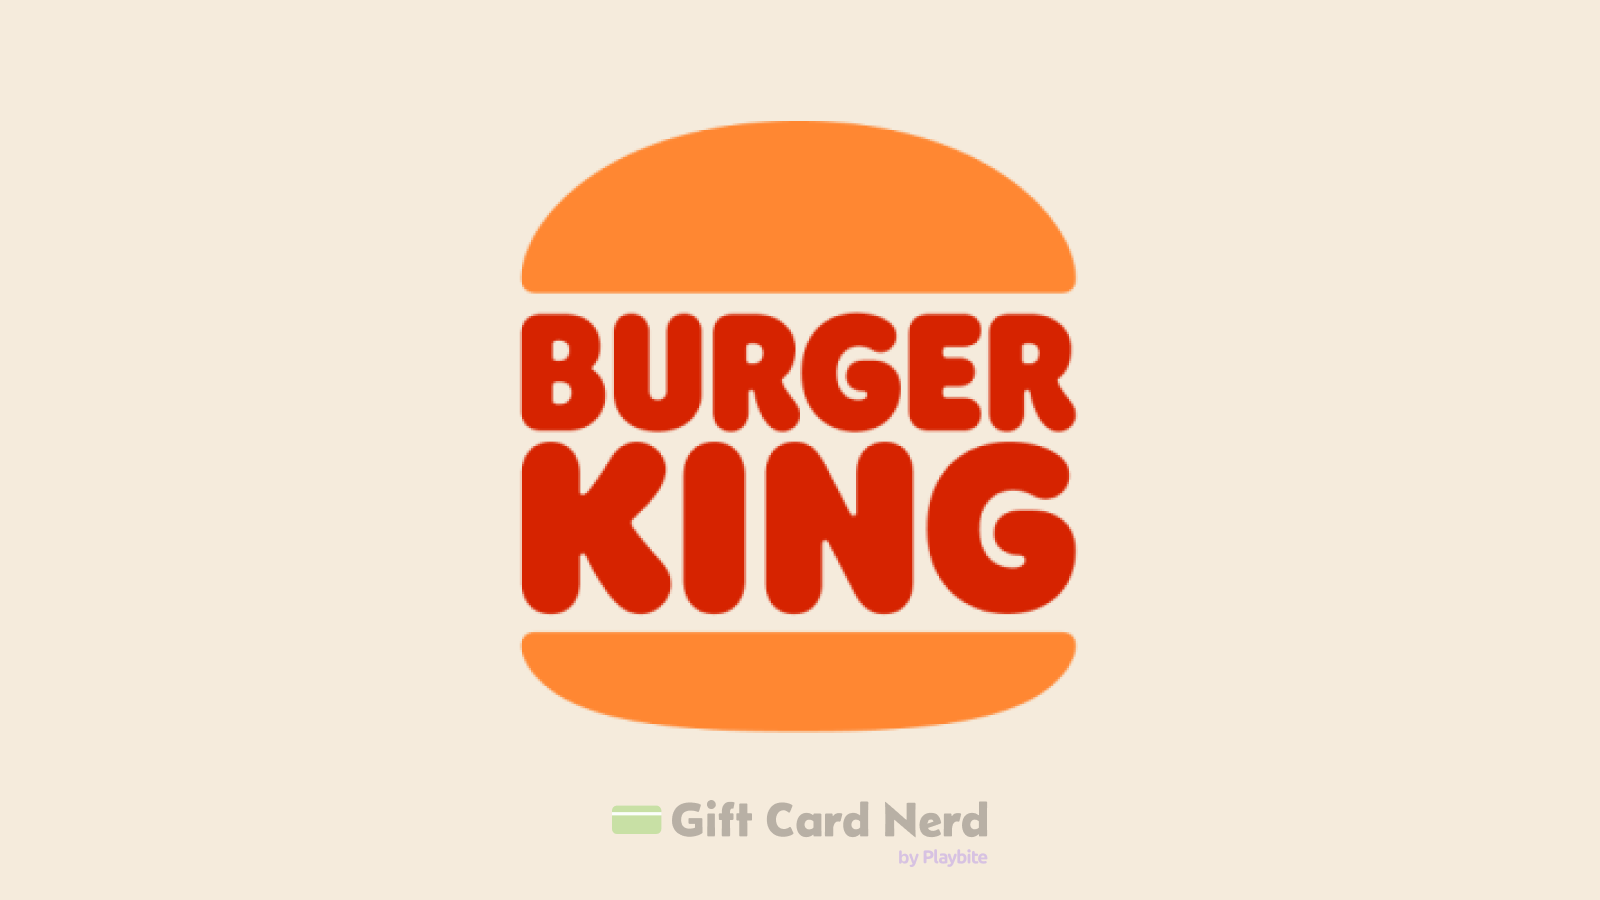 Can I Use a Burger King Gift Card on Amazon?